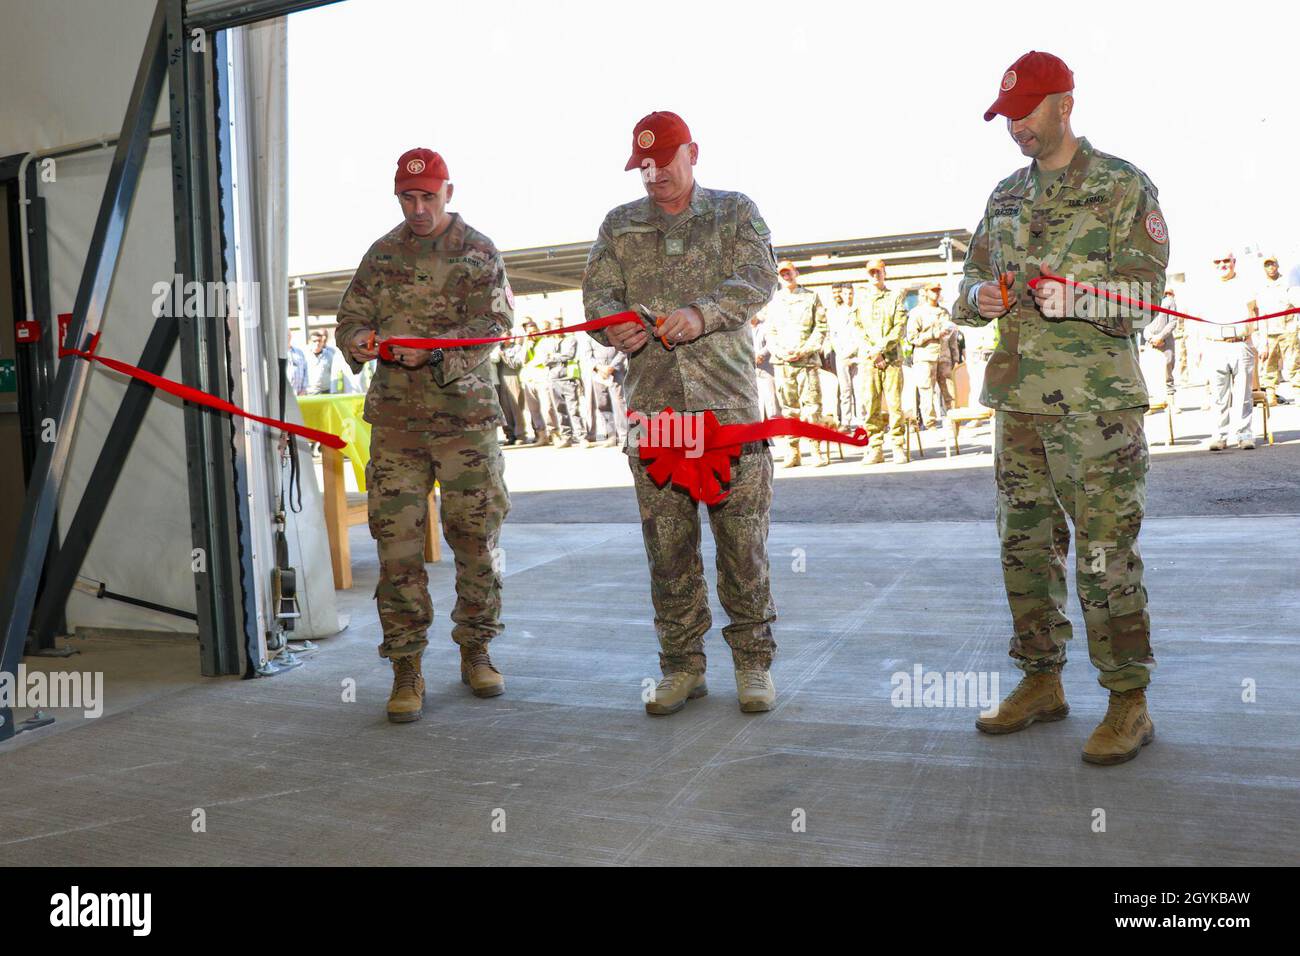 Col. Brandon Klink, left, deputy commander of Task Force Sinai, Maj. Gen. Evan Williams, center, force commander of the Multinational Force and Observers, and Col. Robert Duchaine, commander of Task Force Sinai and the chief of staff for the MFO, cut the ribbon entering the new Supply Support Activity facility on South Camp, Egypt, Jan. 16, 2020. The new facility is essential to the controlled receiving, distribution, issuing and storage of stocked parts supporting the Multinational Force and Observers mission.(U.S. Army photo by Staff Sgt. Eliverto V. Larios) Stock Photo